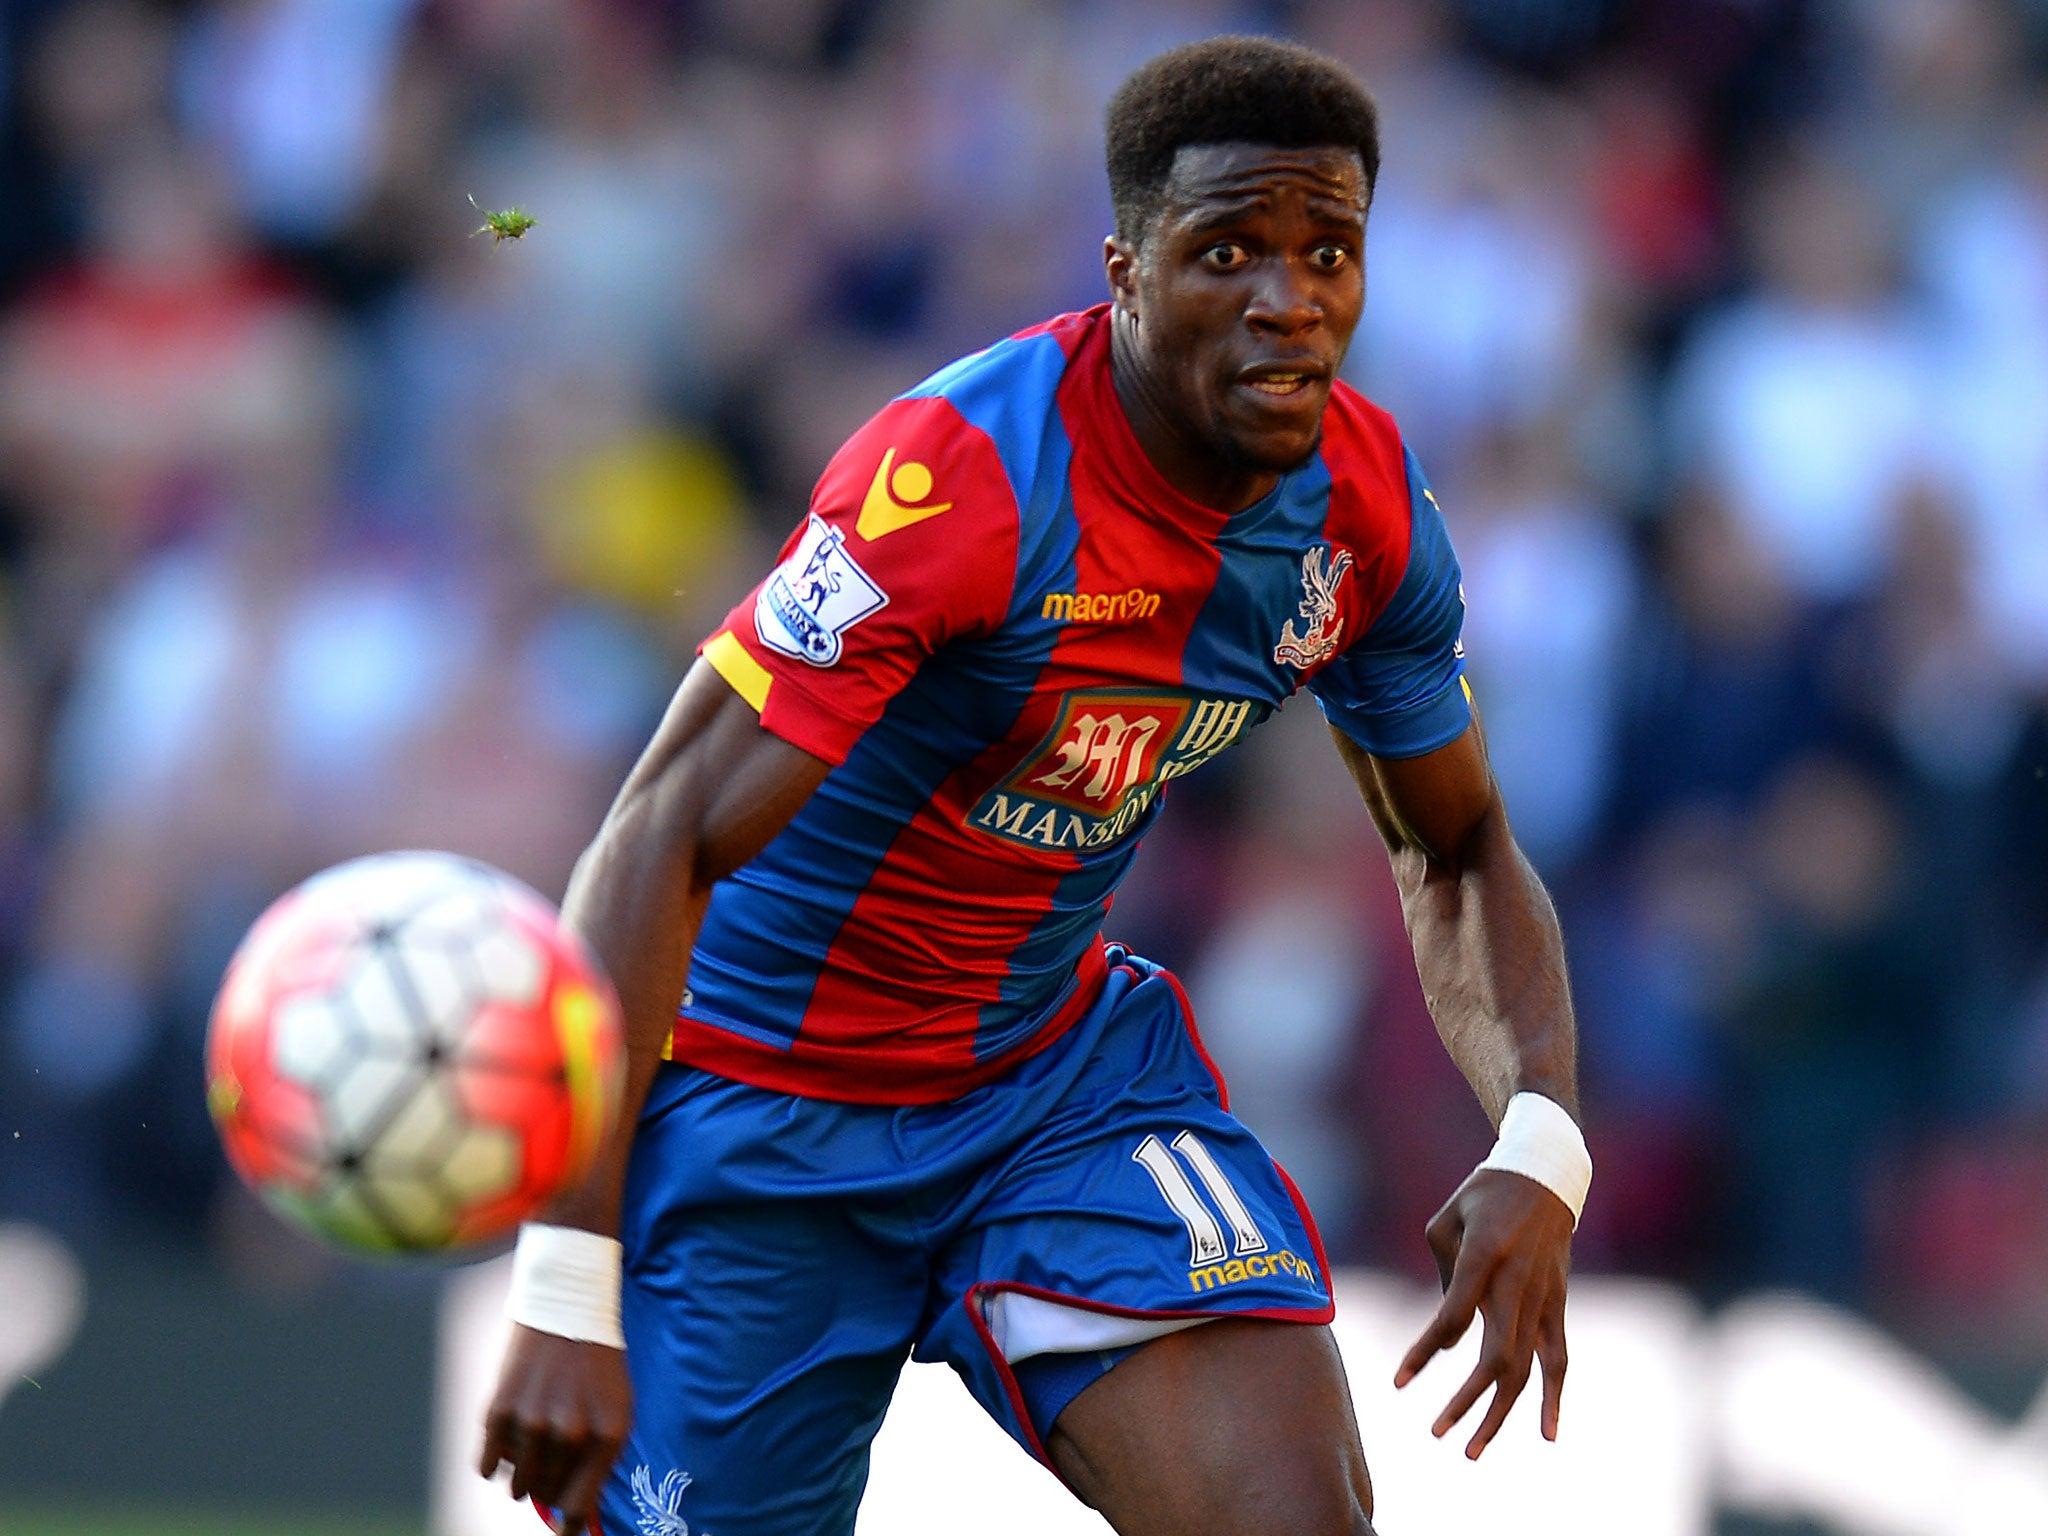 Wilfried Zaha doing his best to 'give back' by donating 10% of his